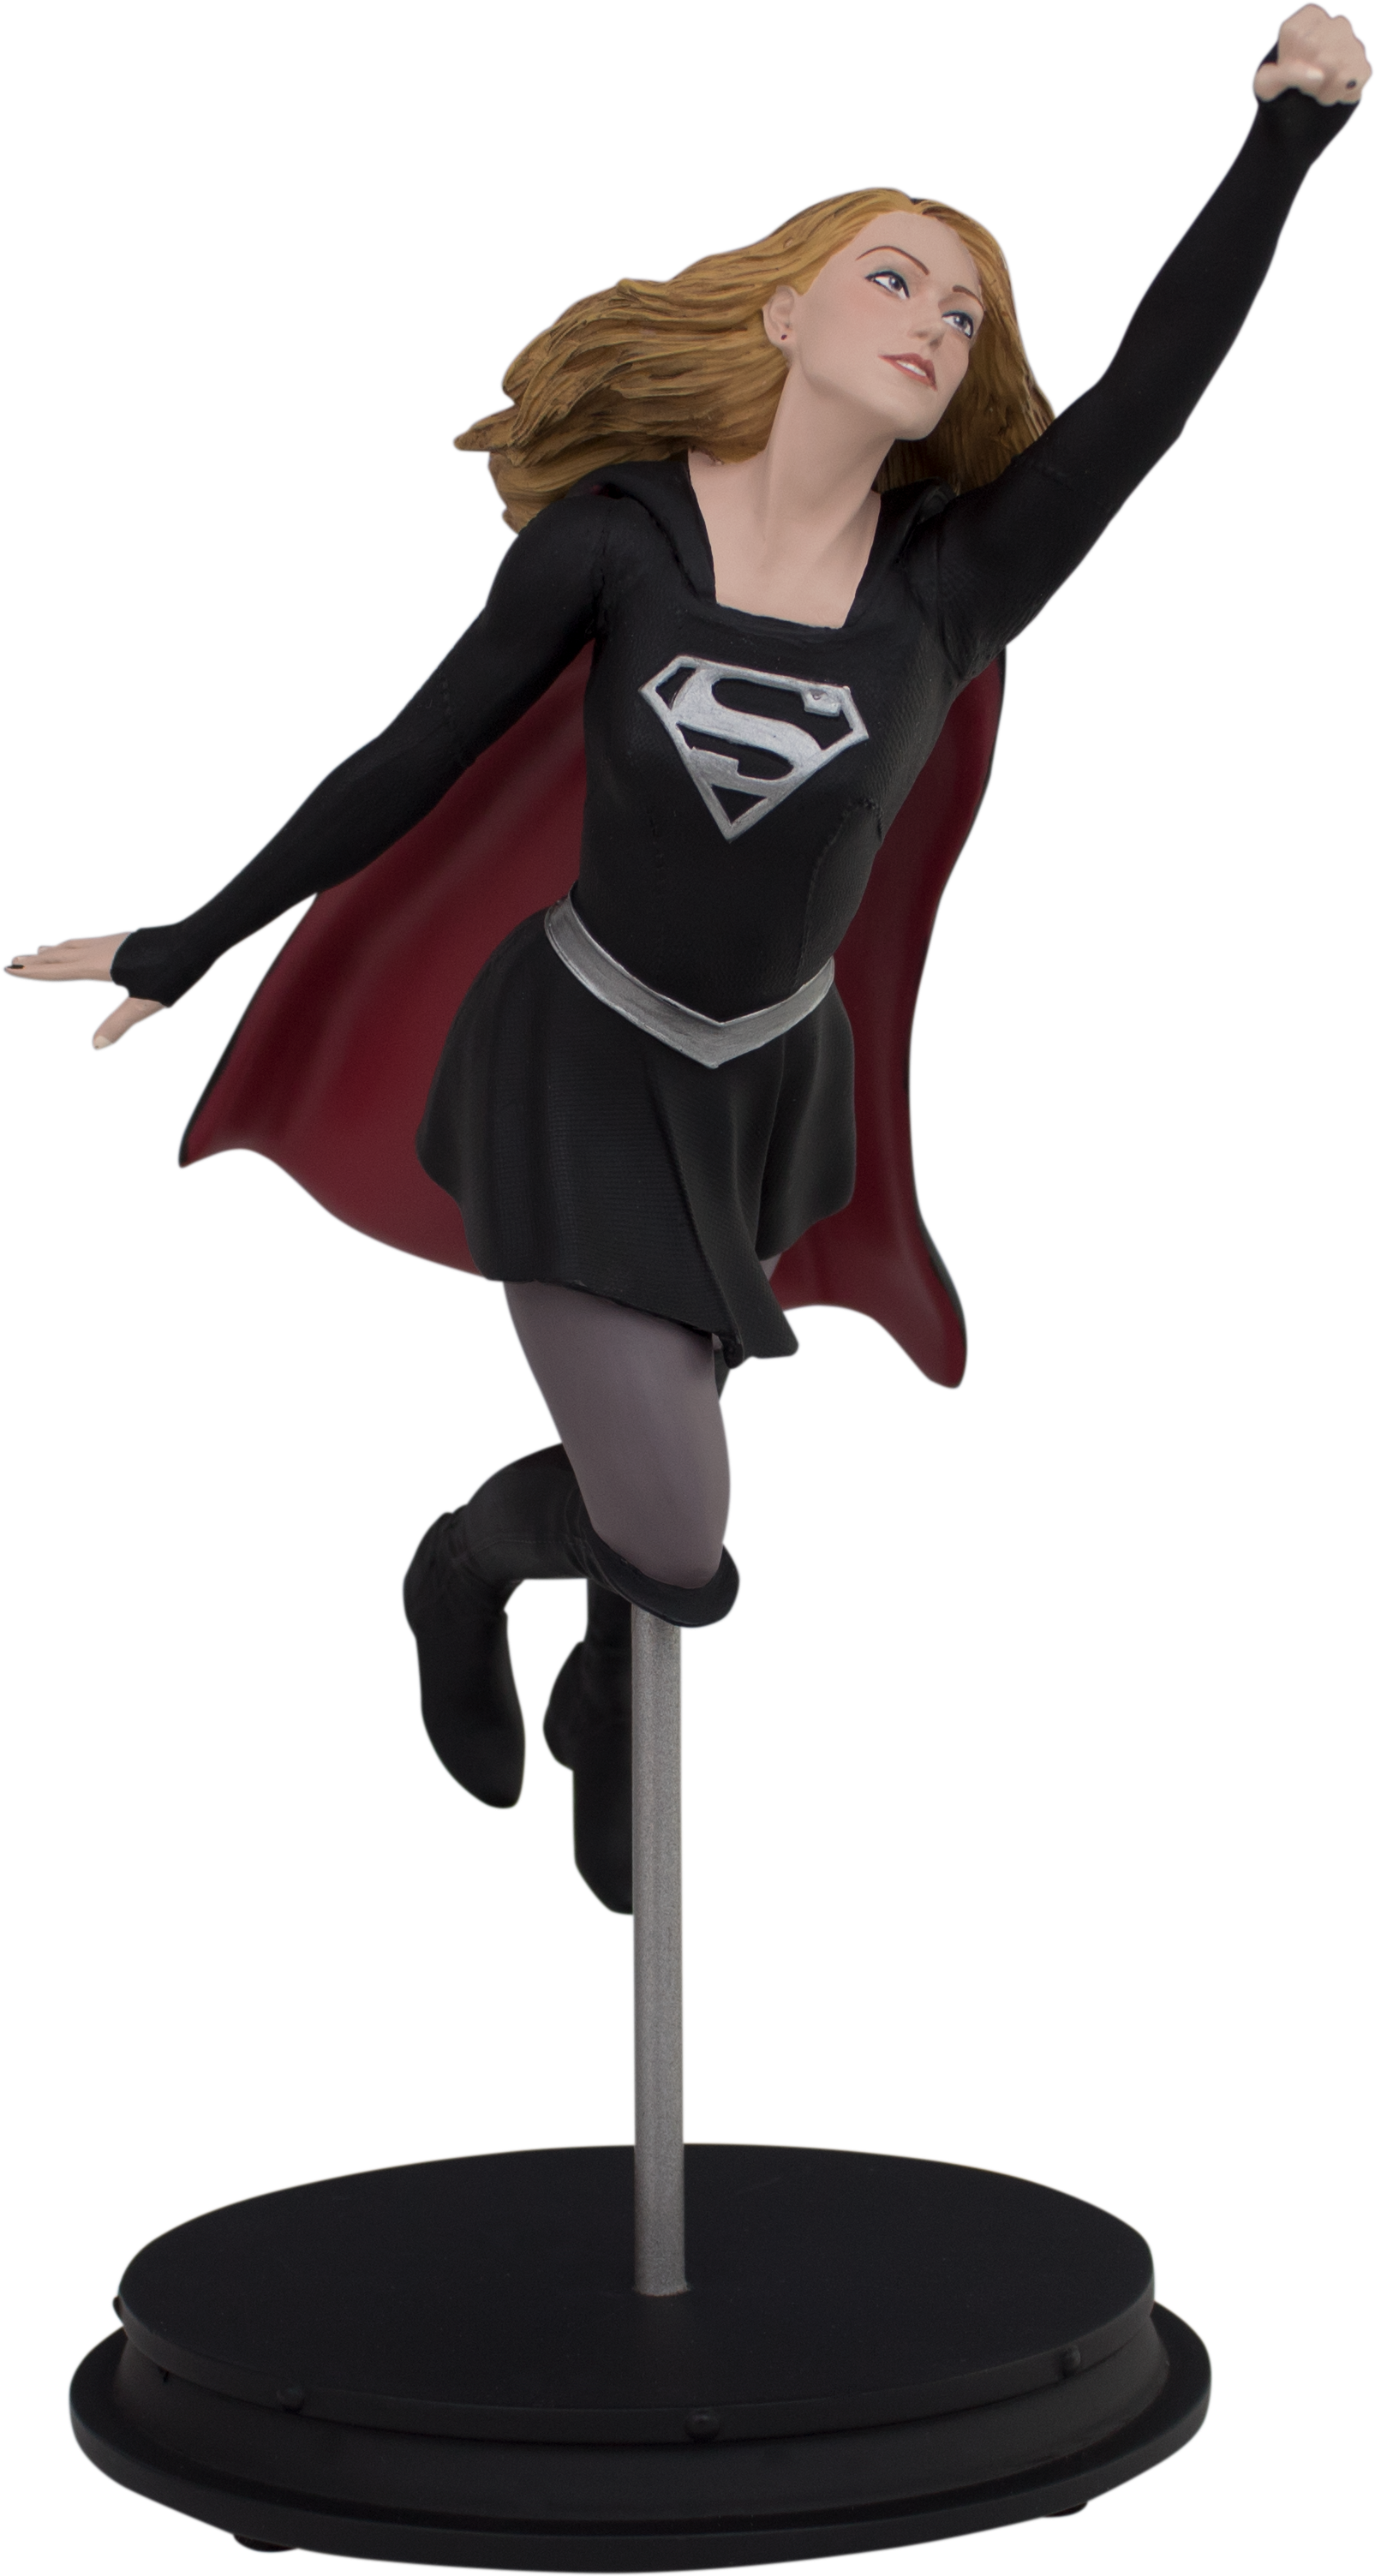 Comic Con 2019 Supergirl, Hd Png Download